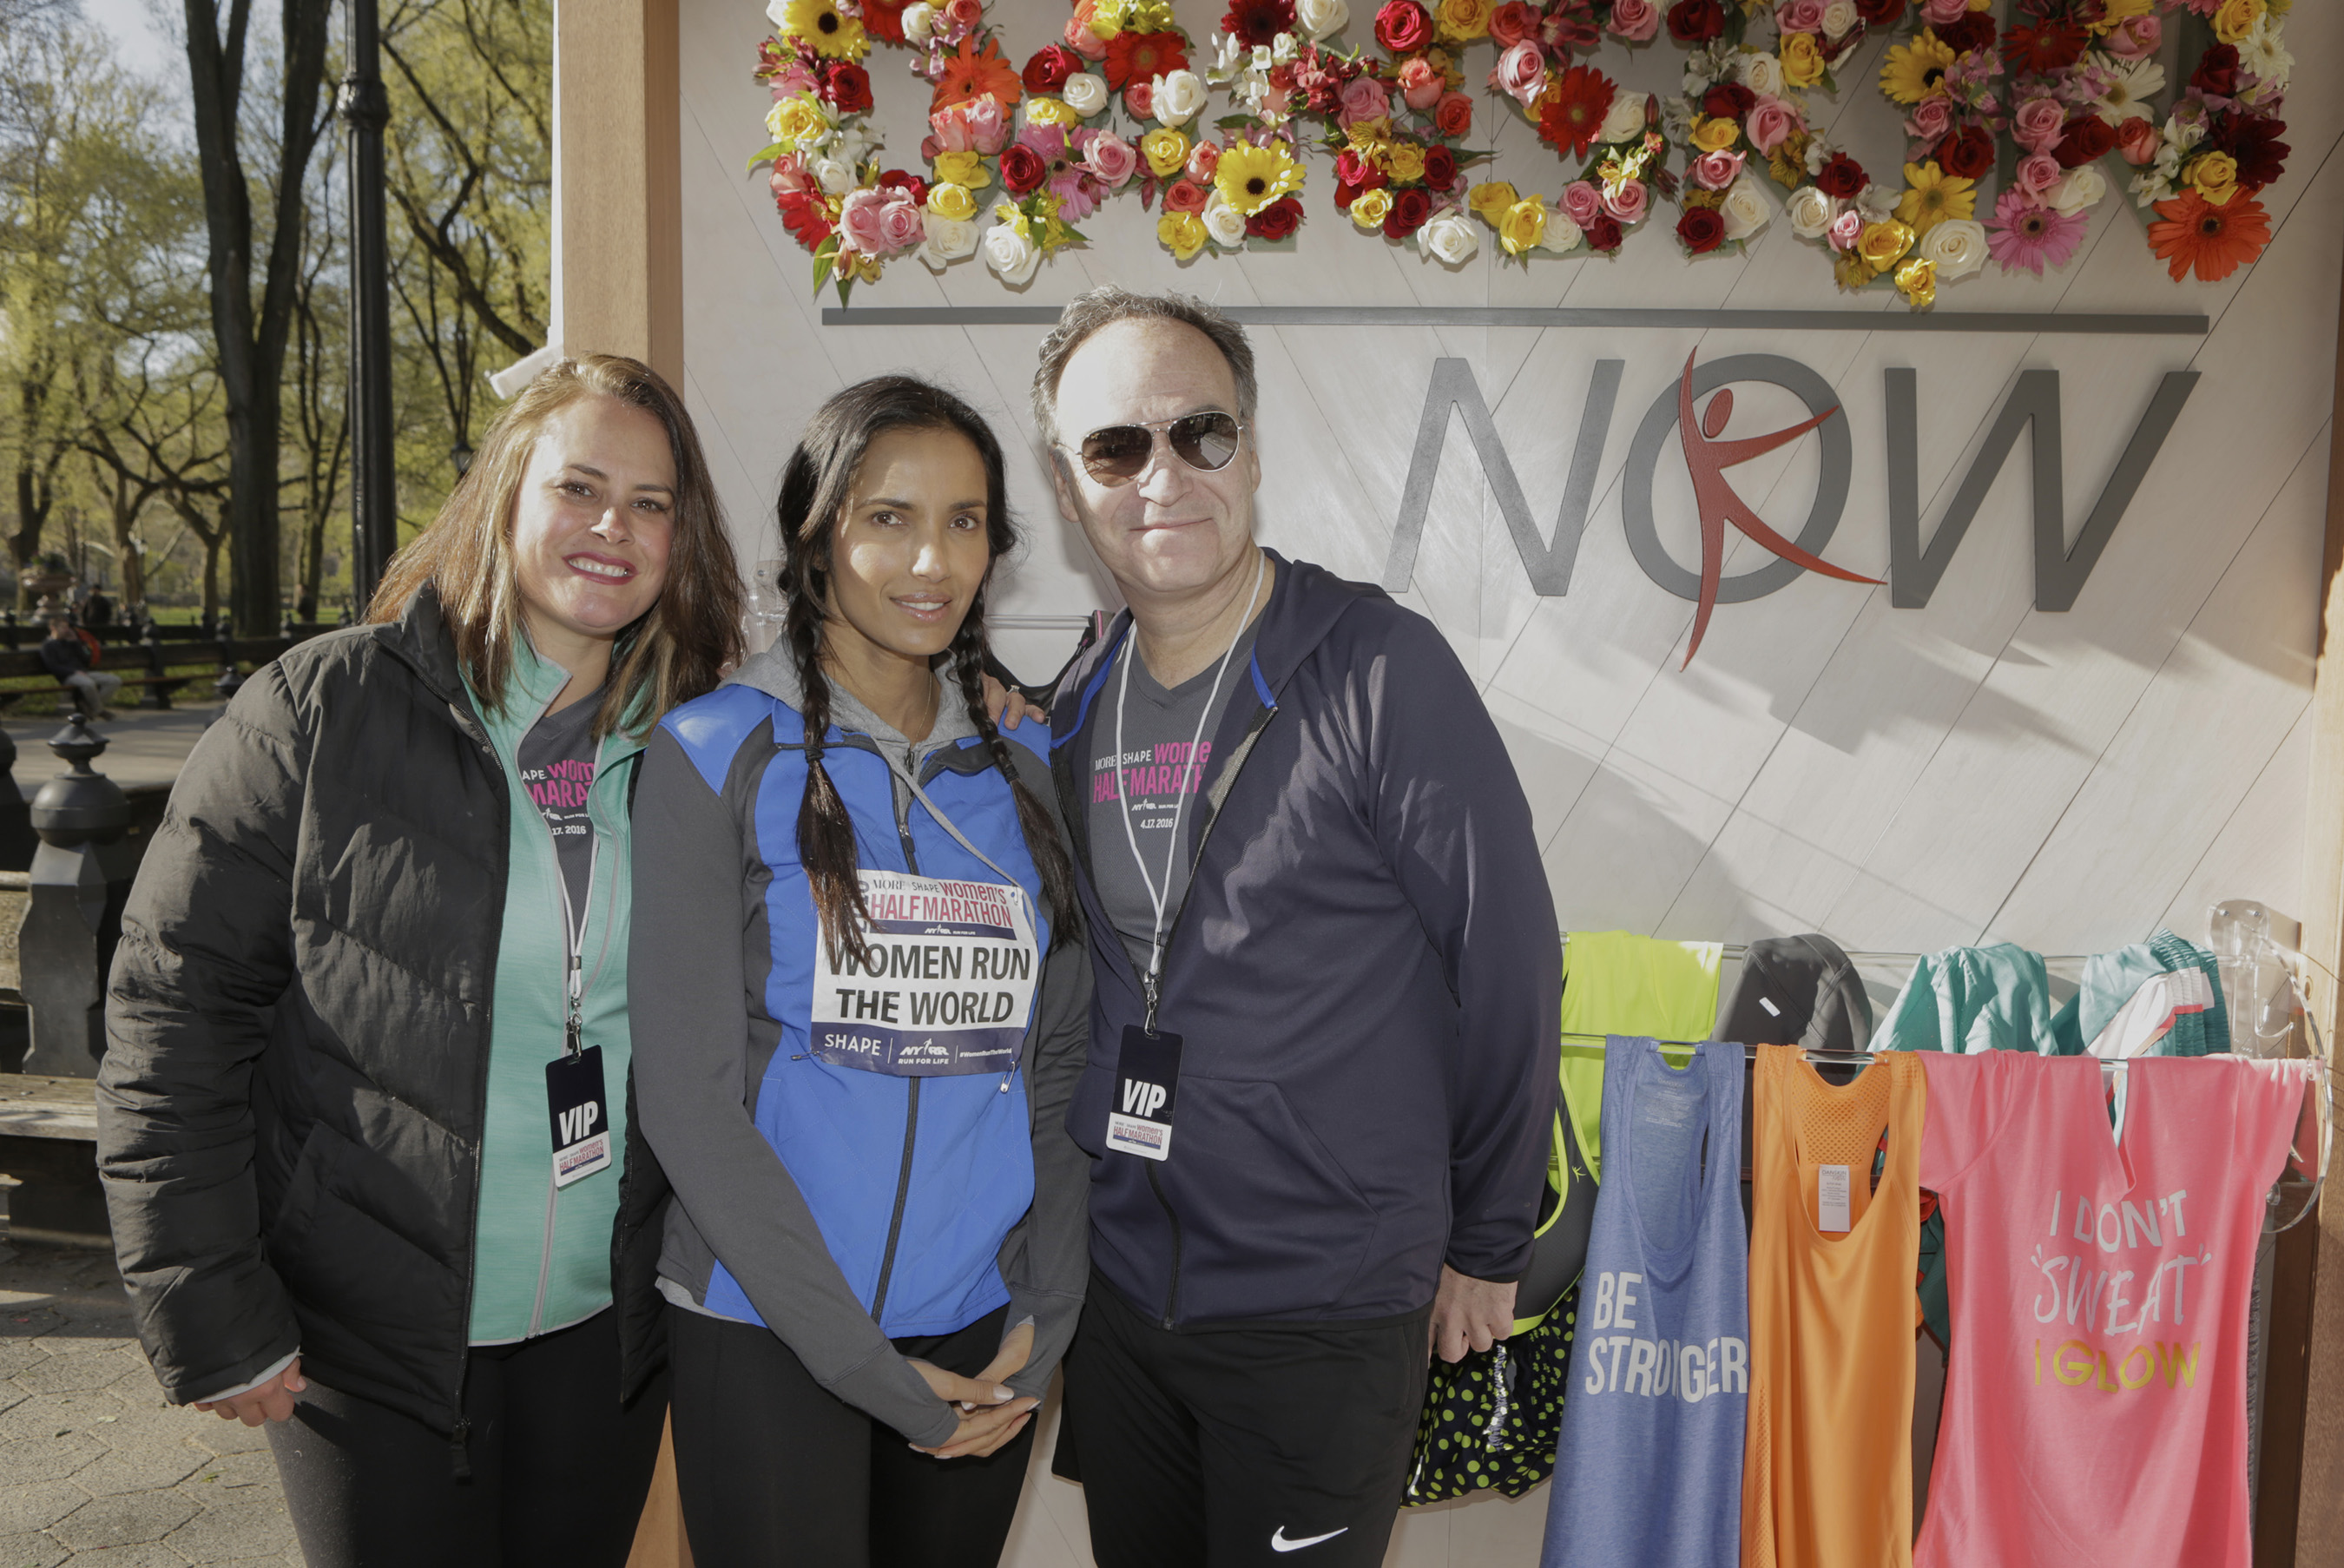 Padma Lakshmi of Bravo’s Top Chef joins SHAPE Editor-in-Chief Elizabeth Goodman Artis and Publisher Tim O’Connor at the 13th Annual MORE/SHAPE Women’s Half-Marathon in Central Park on April 17, 2016.